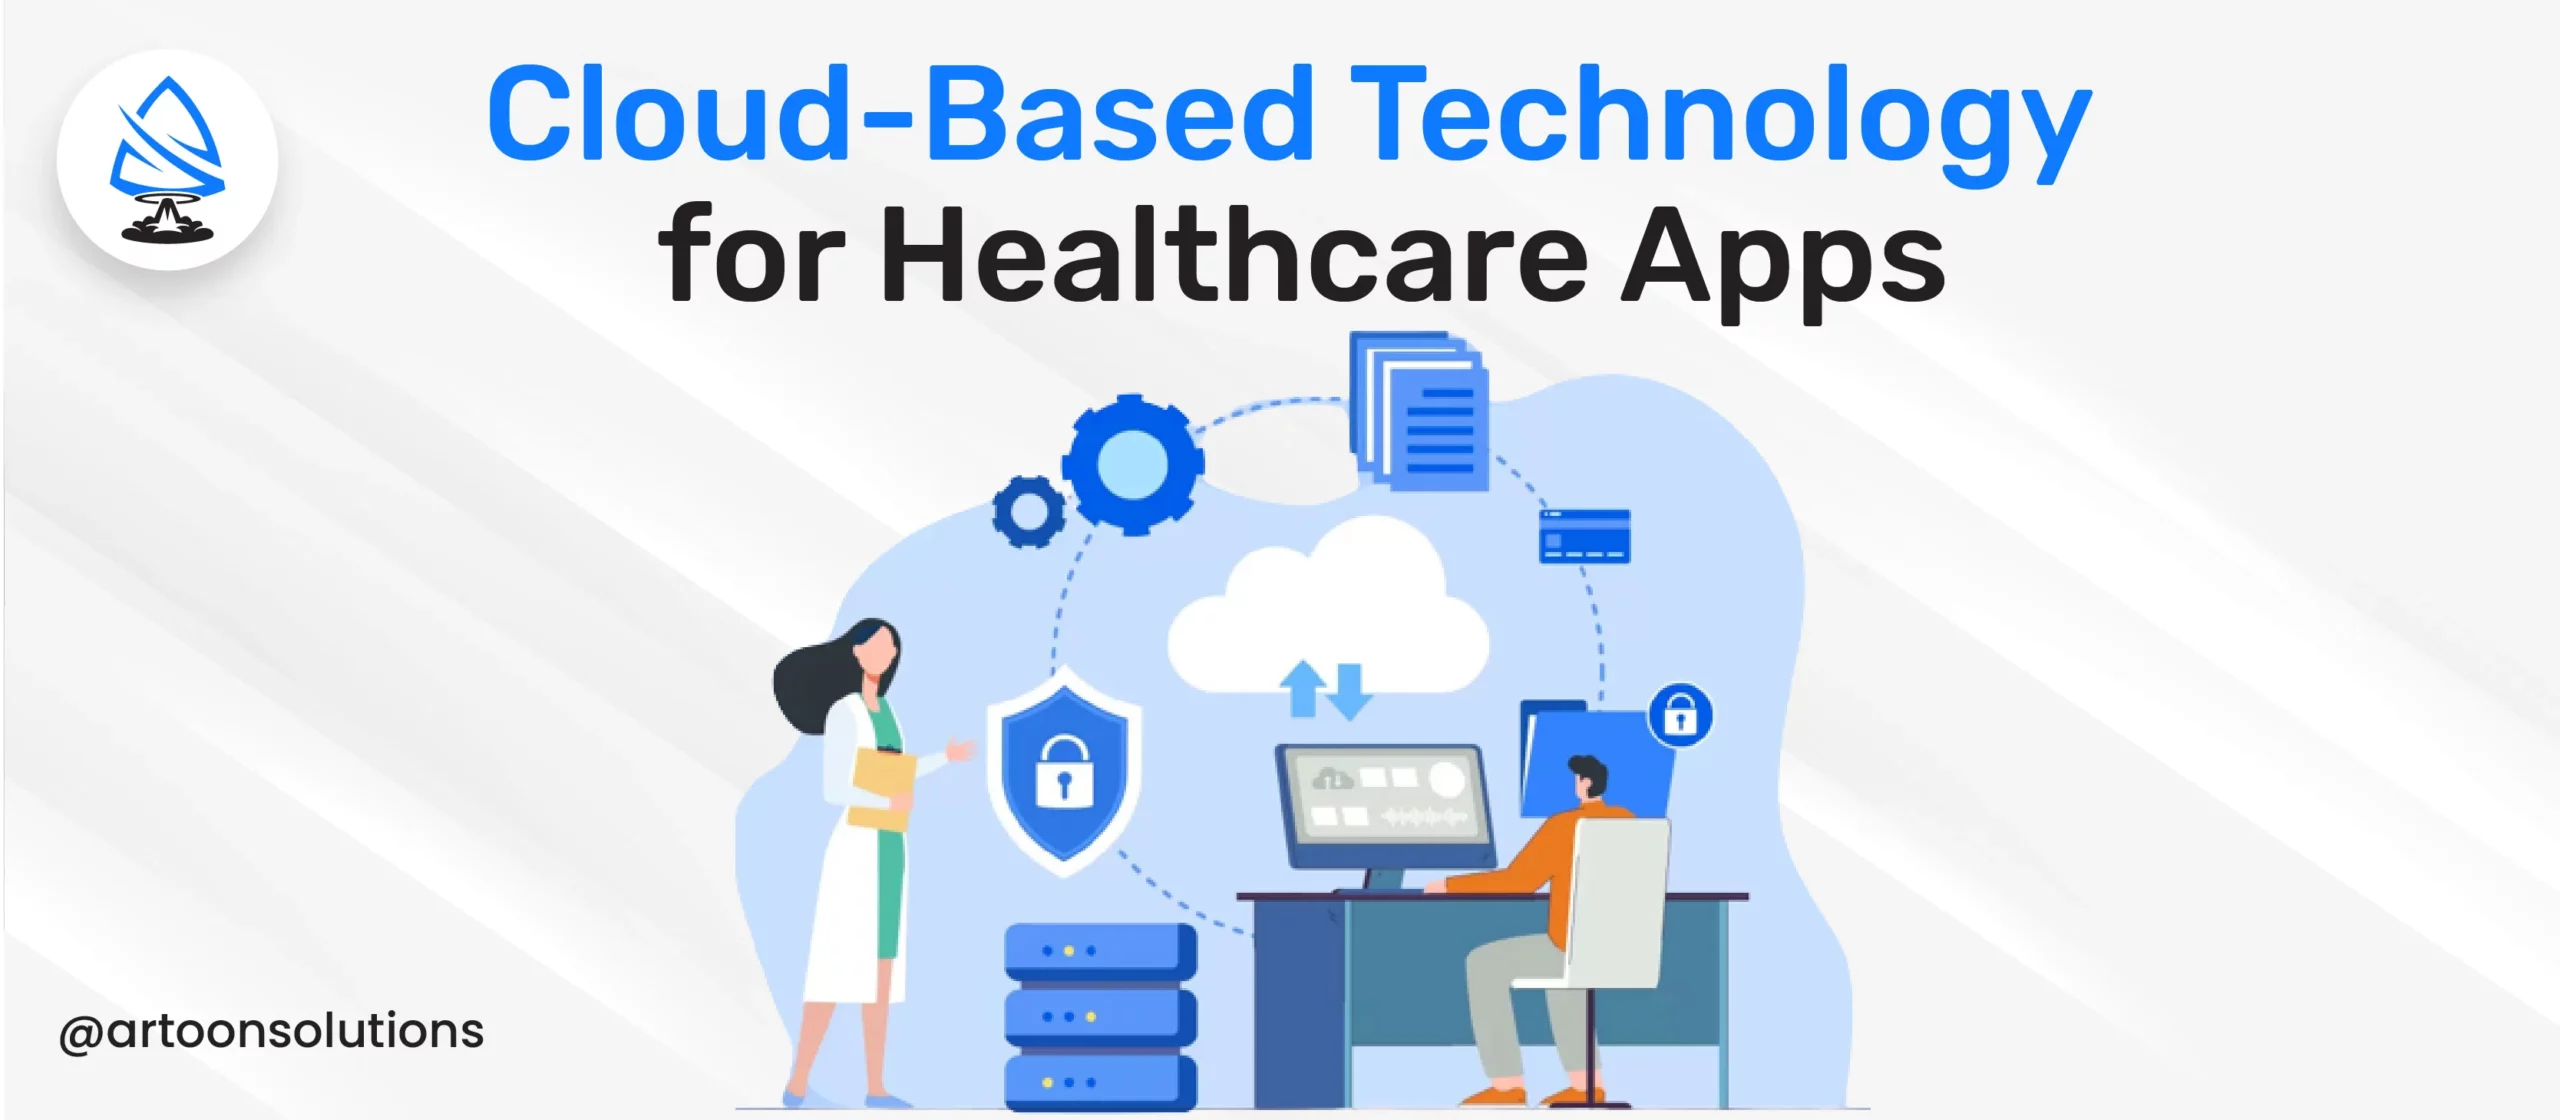 Cloud-based Technology for Healthcare Apps